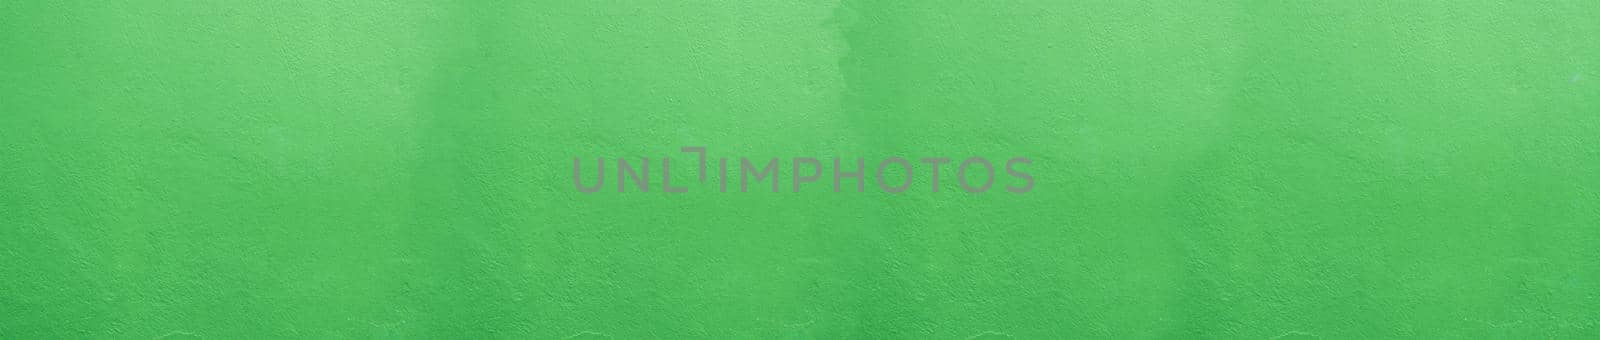 Panoramic Wide angle Vintage textured stucco wall background. green stucco wall. Background of a green stucco coated and painted exterior, rough cast of cement and. Abstract  wall grunge stone. by Petrichor